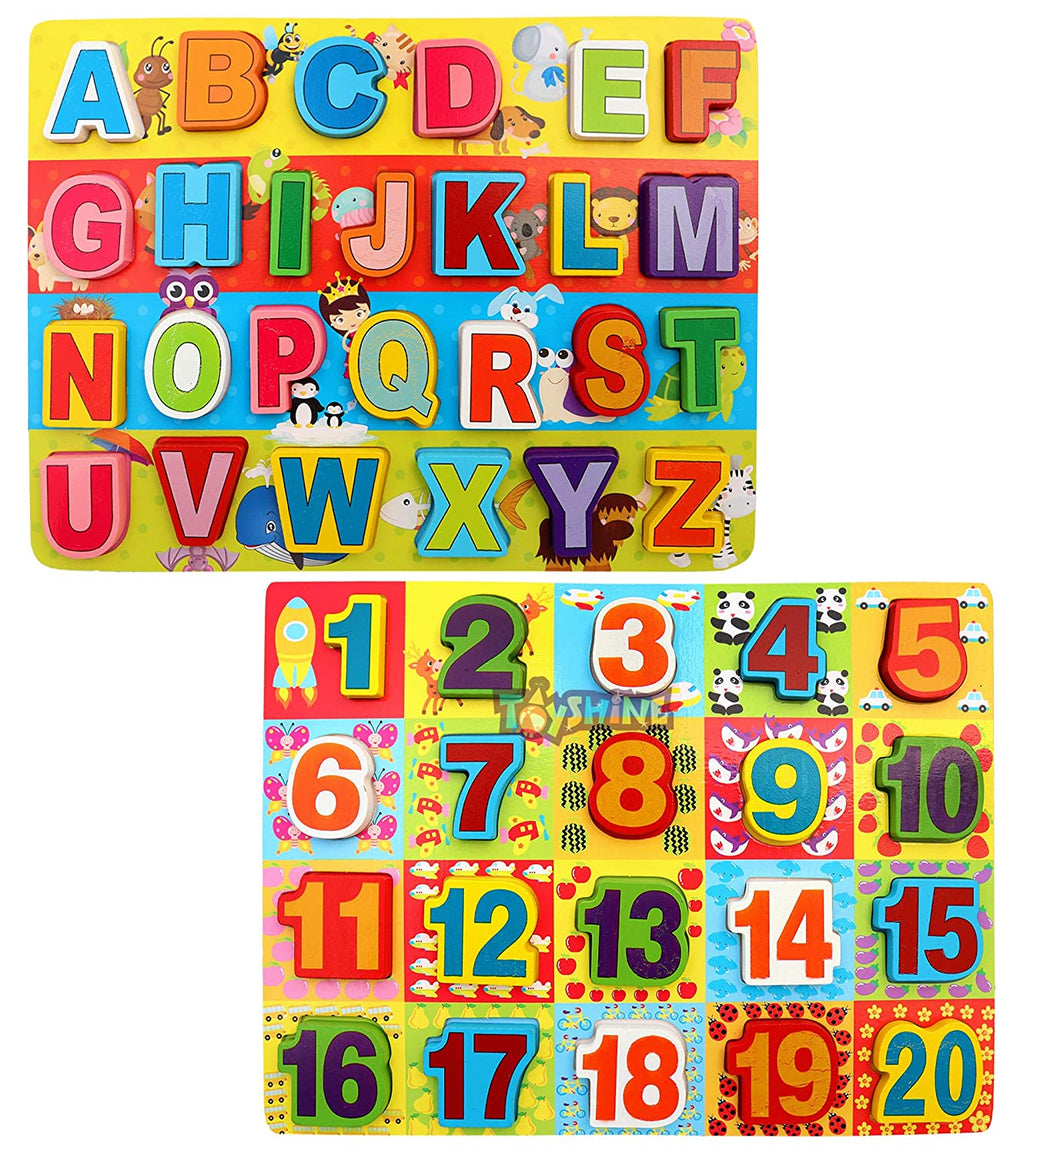 Toyshine Picto-Puzzle Premium Wooden ABC 123 Chunky Letters and Numbers Puzzle Toy, Educational and Learning Toy